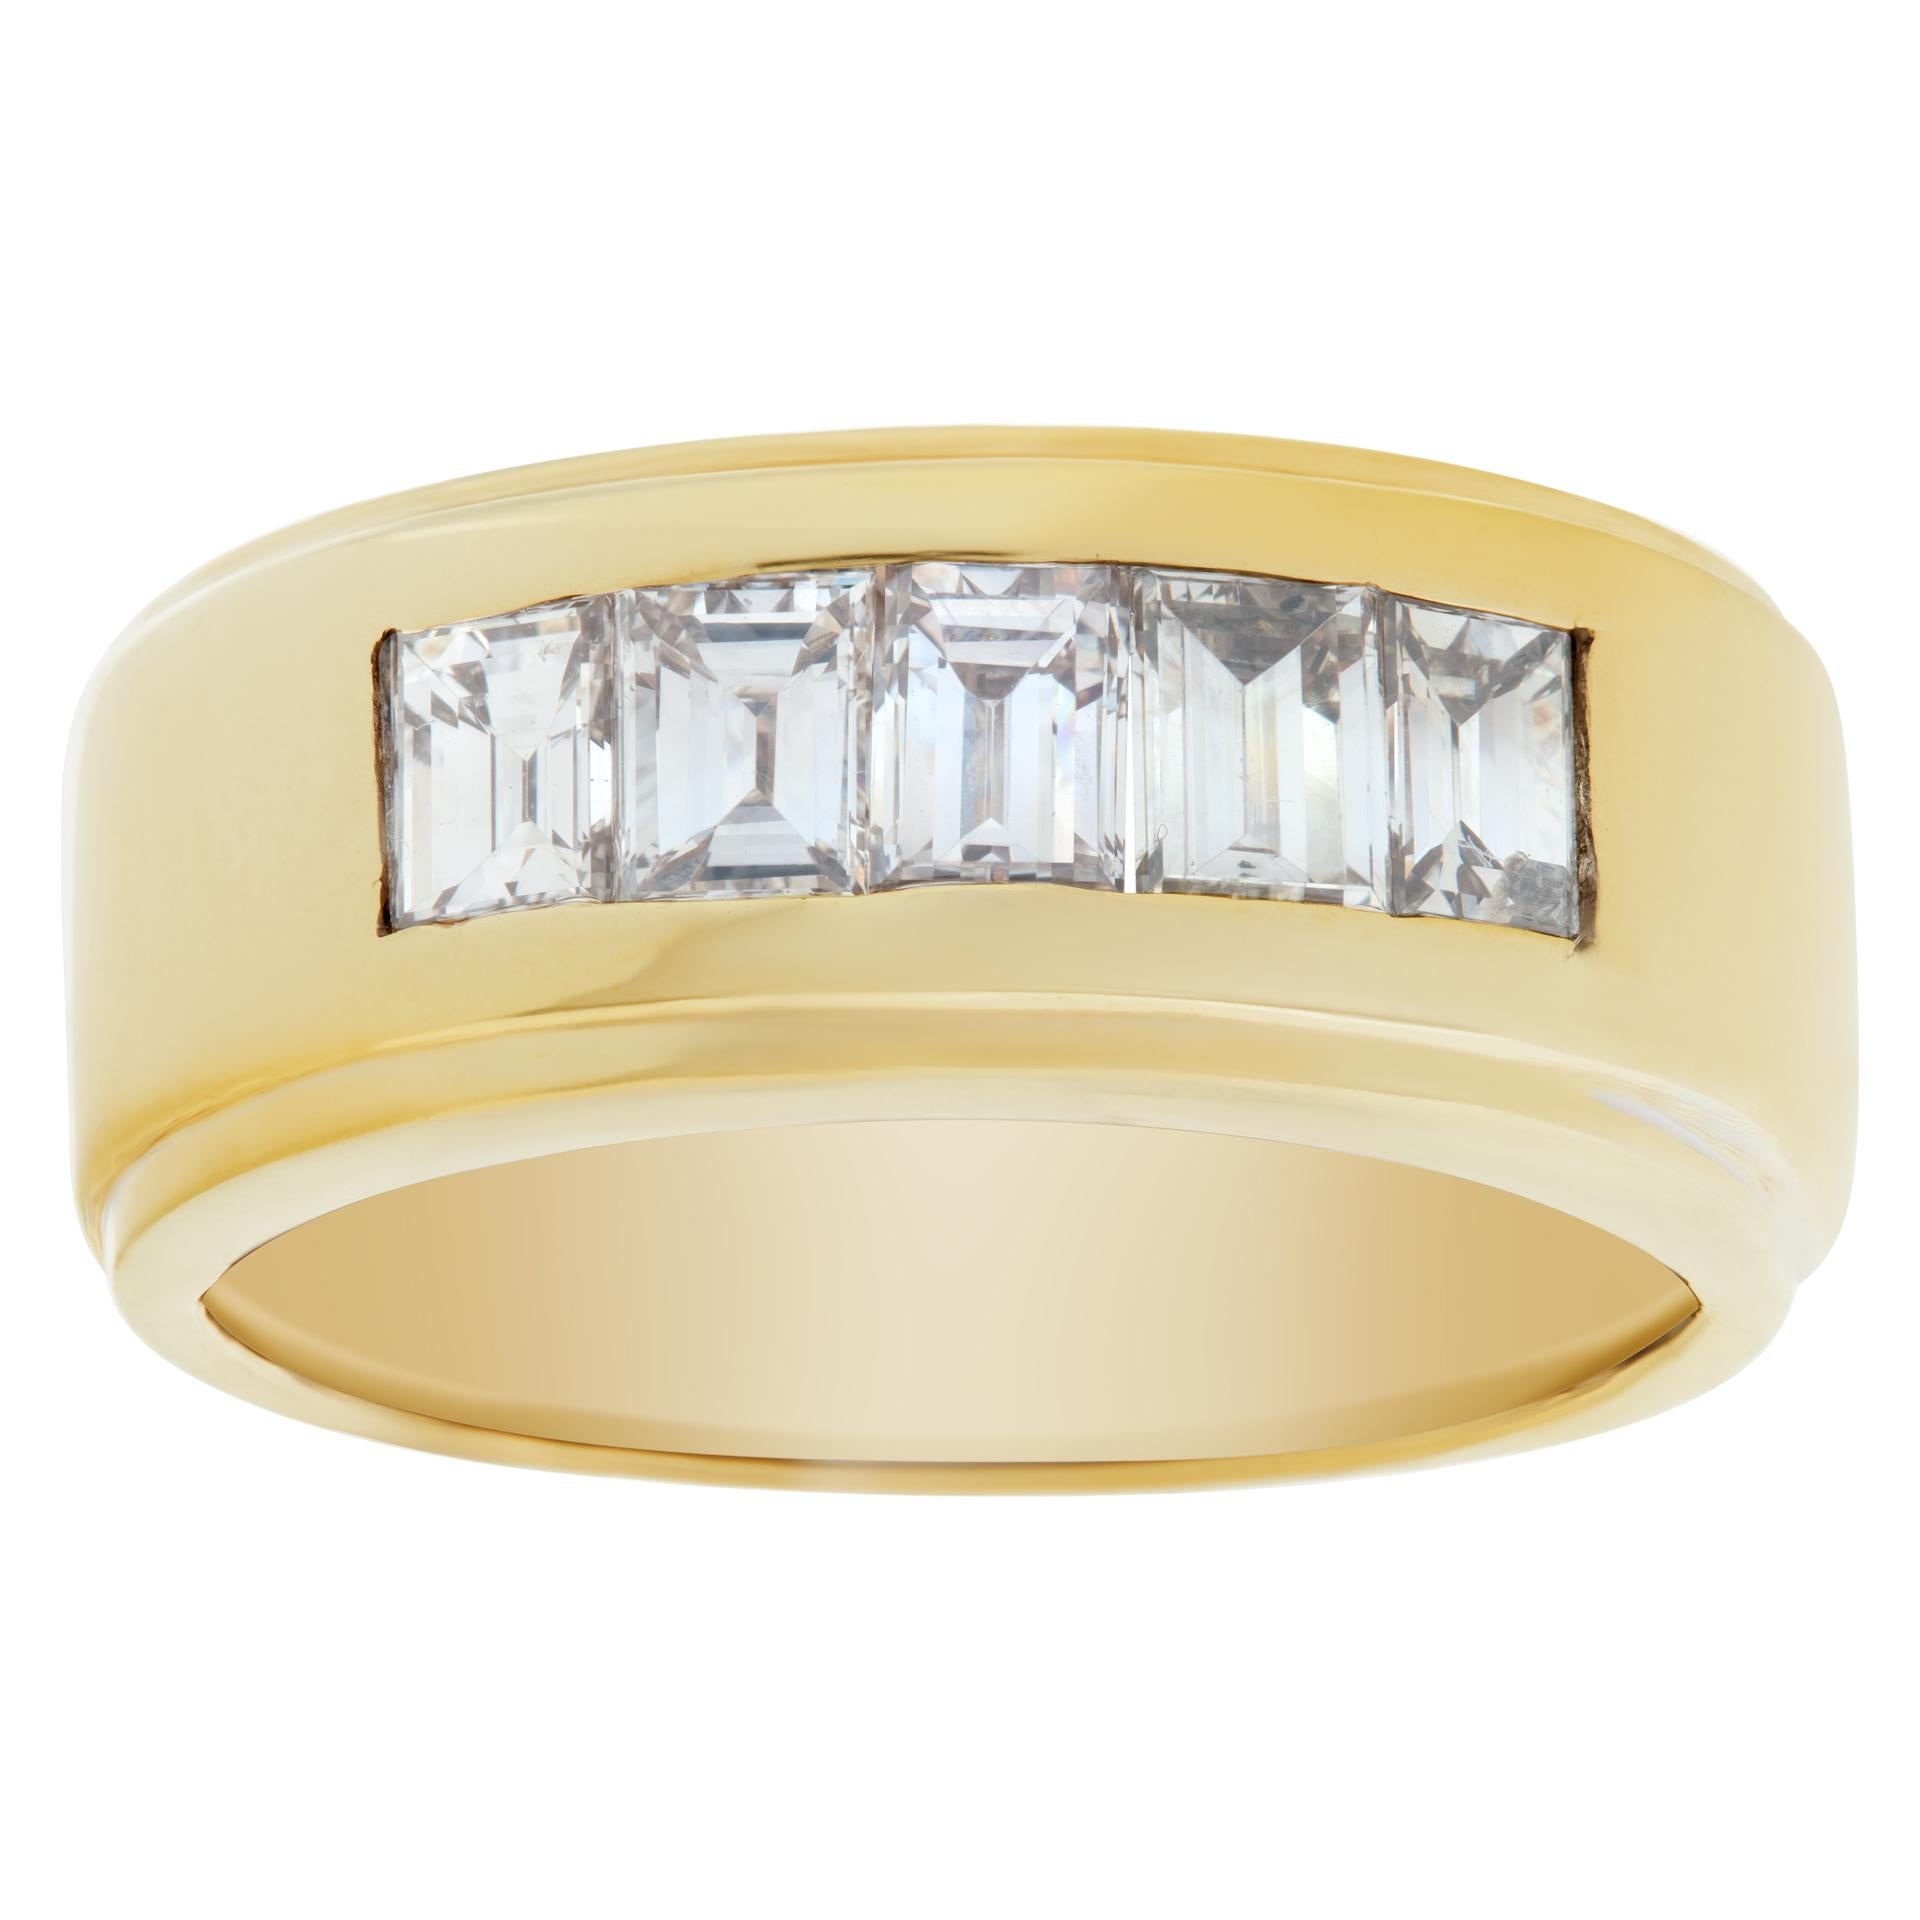 Classic diamond band in 14k yellow gold if preferred can be in white gold. Approx.  0.50 cts in white clean channel set emerald cut diamonds. 8.7mm width. Size 9.This Diamond ring is currently size 9 and some items can be sized up or down, please